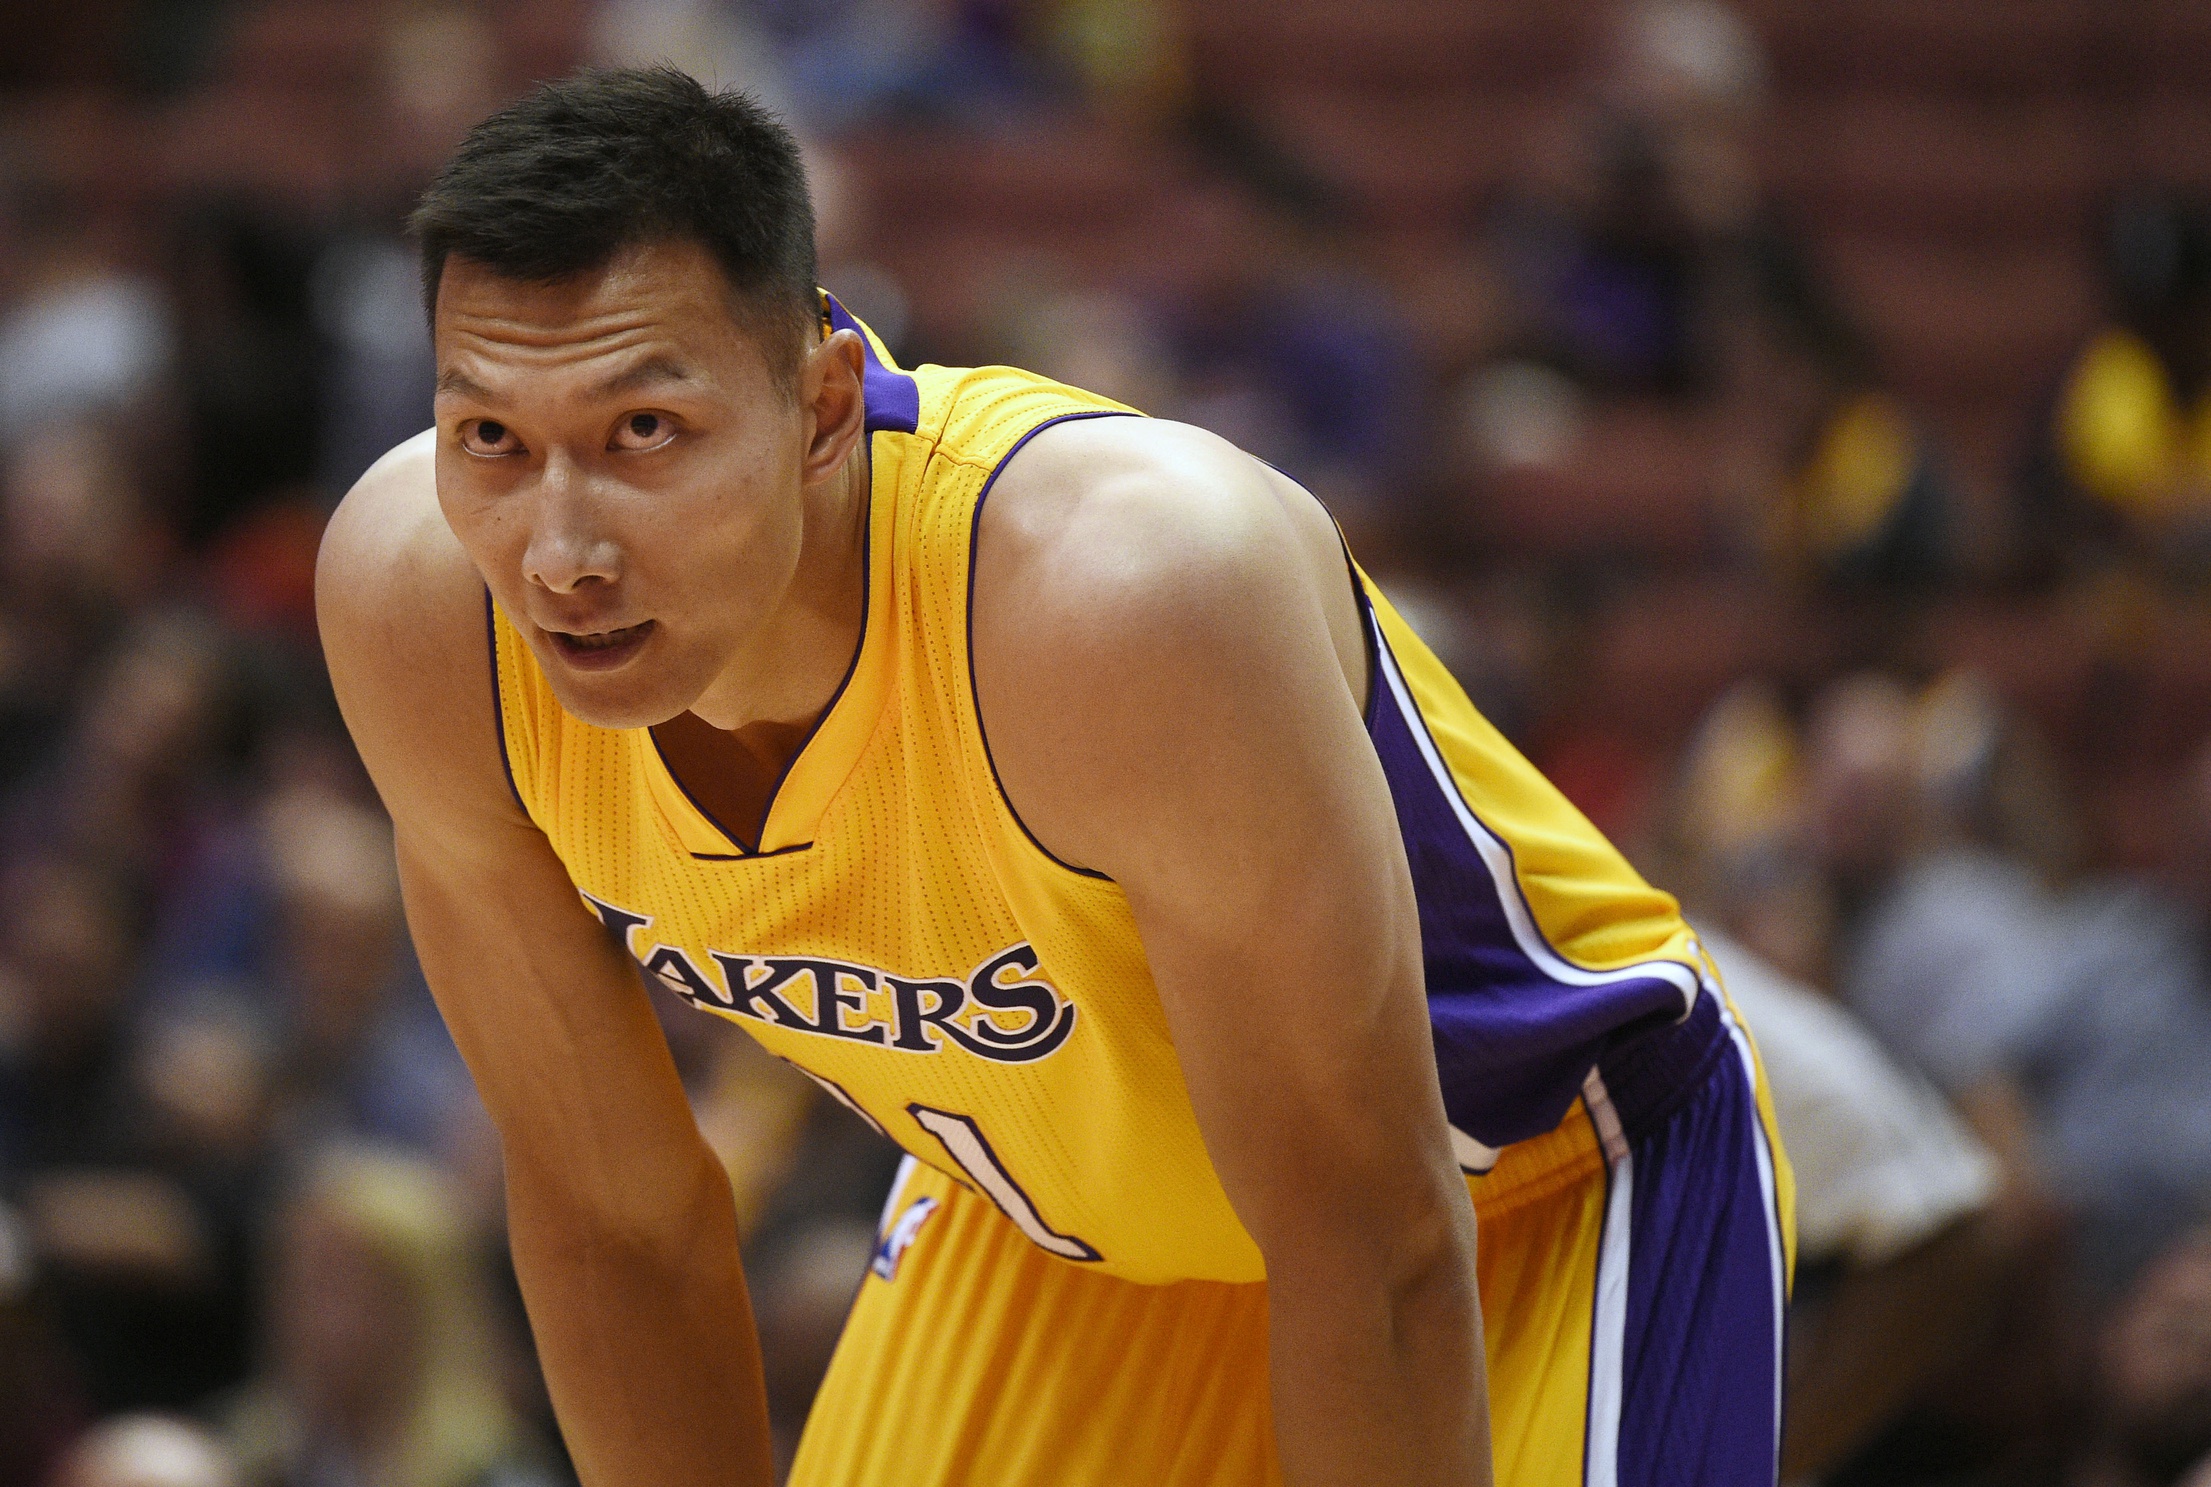 Oct 4, 2016; Anaheim, CA, USA; Los Angeles Lakers forward Yi Jianlian (11) in action during the first half against the Sacramento Kings at Honda Center. Mandatory Credit: Kelvin Kuo-USA TODAY Sports